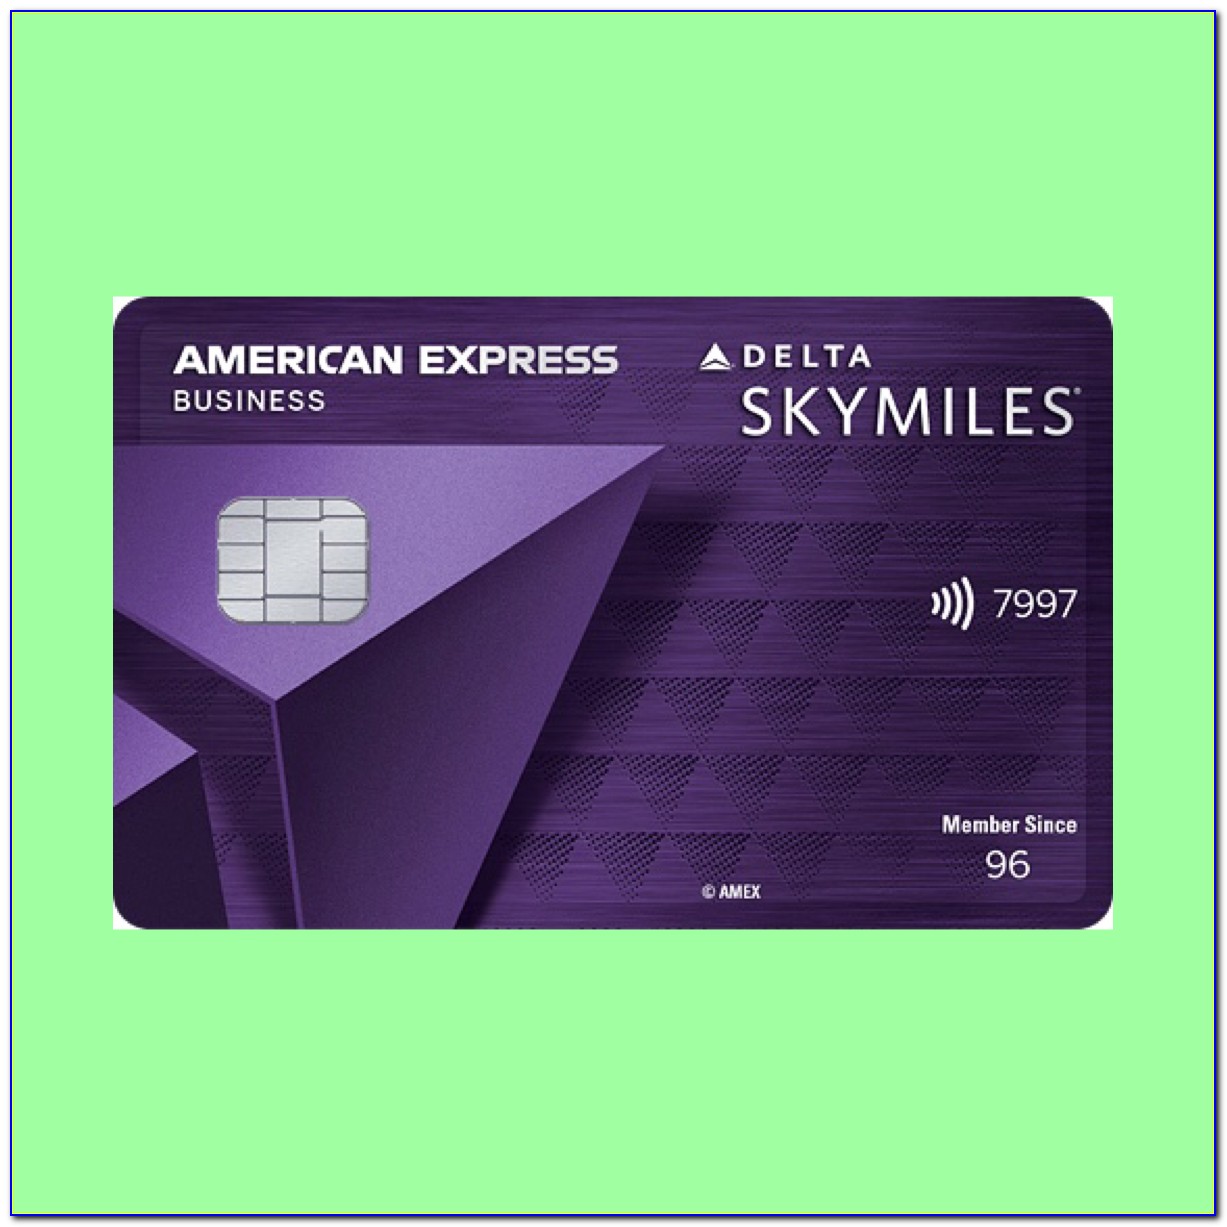 American Express Gold Business Card Limit